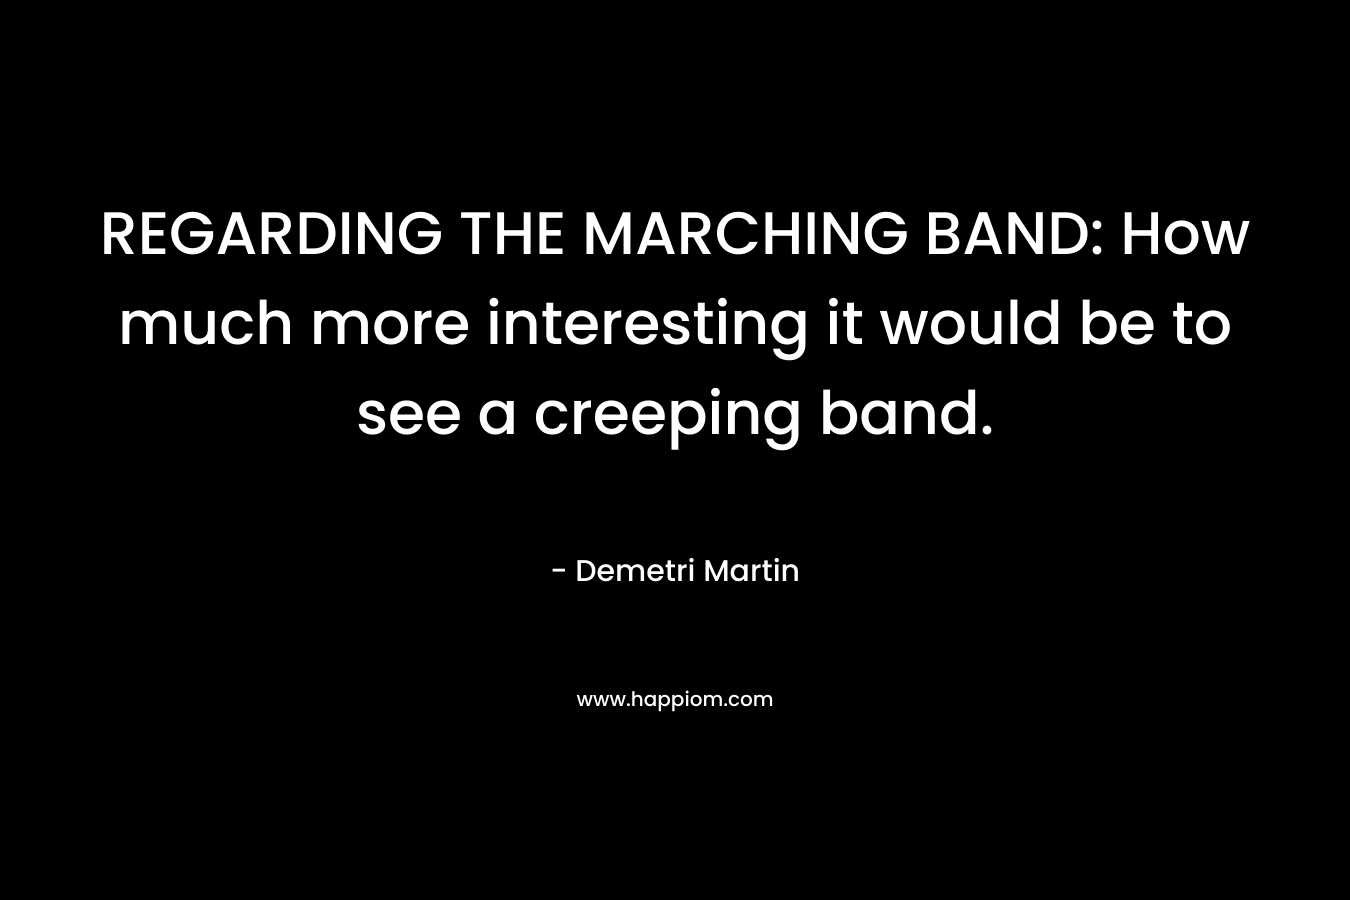 REGARDING THE MARCHING BAND: How much more interesting it would be to see a creeping band.